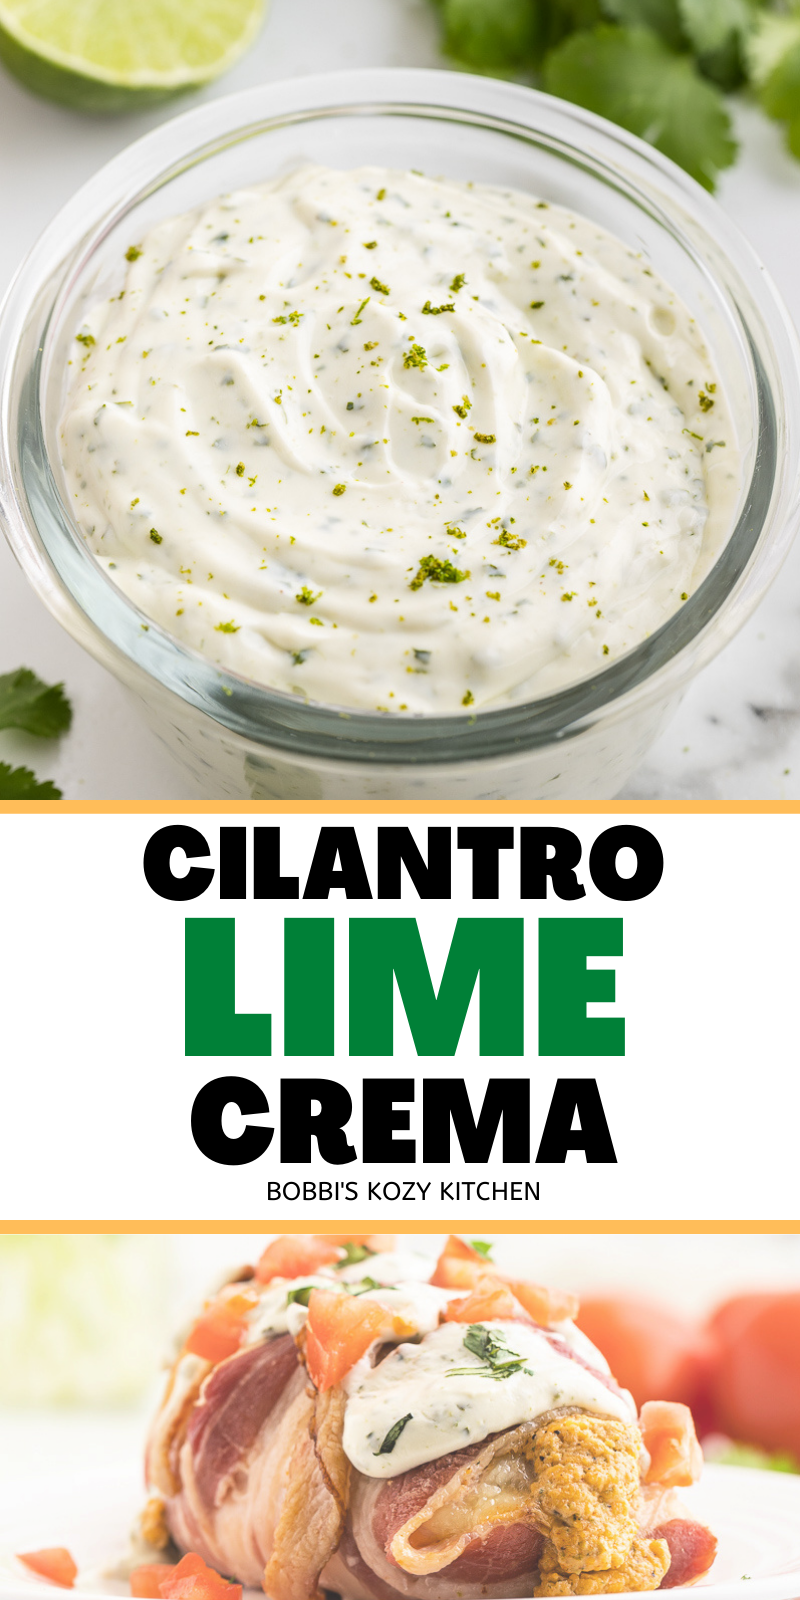 Cilantro Lime Crema - This tasty cilantro lime crema recipe is easy to make, keto friendly, and works so well with everything from tacos, to burritos, to enchiladas, and more! #keto #lowcarb #glutenfree #mexican #sauce #cilantro #lime #crema #cream